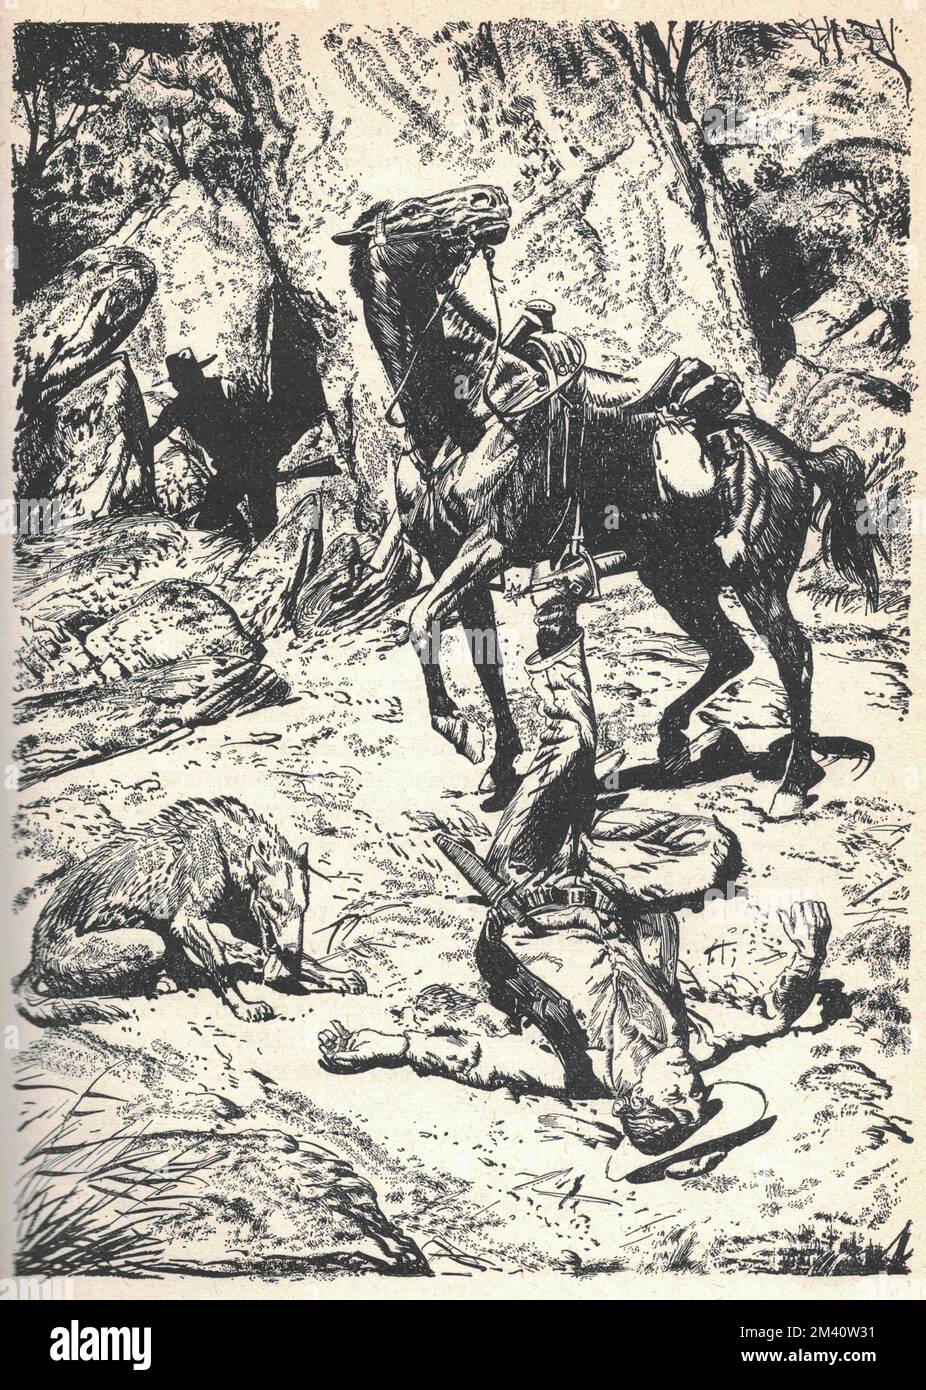 Man lying on the ground after falling from a horse.  Old black and white illustration. Vintage drawing. Illustration by Zdenek Burian. Zdenek Michael Frantisek Burian (11 February 1905 in Koprivnice, Moravia, Austria-Hungary 1 July 1981 in Prague, Czechoslovakia) was a Czech painter, book illustrator and palaeoartist whose work played a central role in the development of palaeontological reconstruction. Originally recognised only in his native Czechoslovakia, Burian's fame later spread to an international audience during a remarkable career spanning six decades (1930s to 1980s). He is regarded Stock Photo